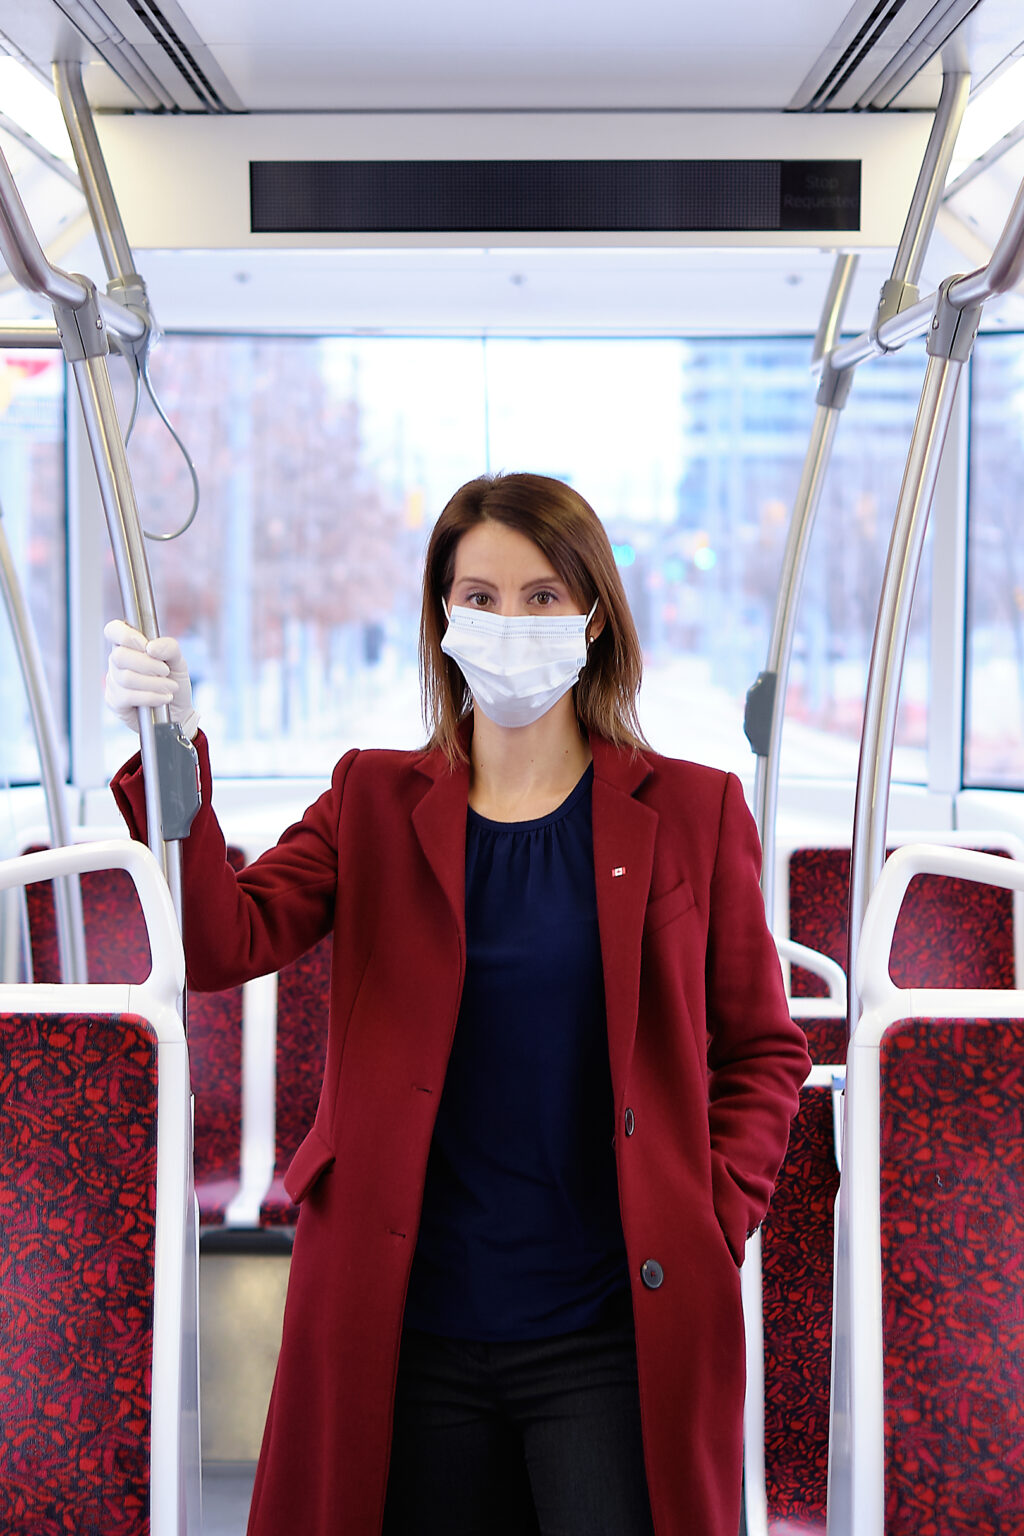 Josipa Petrunic stands inside a transit bus wearing a face mask, a long red coat and a navy shirt